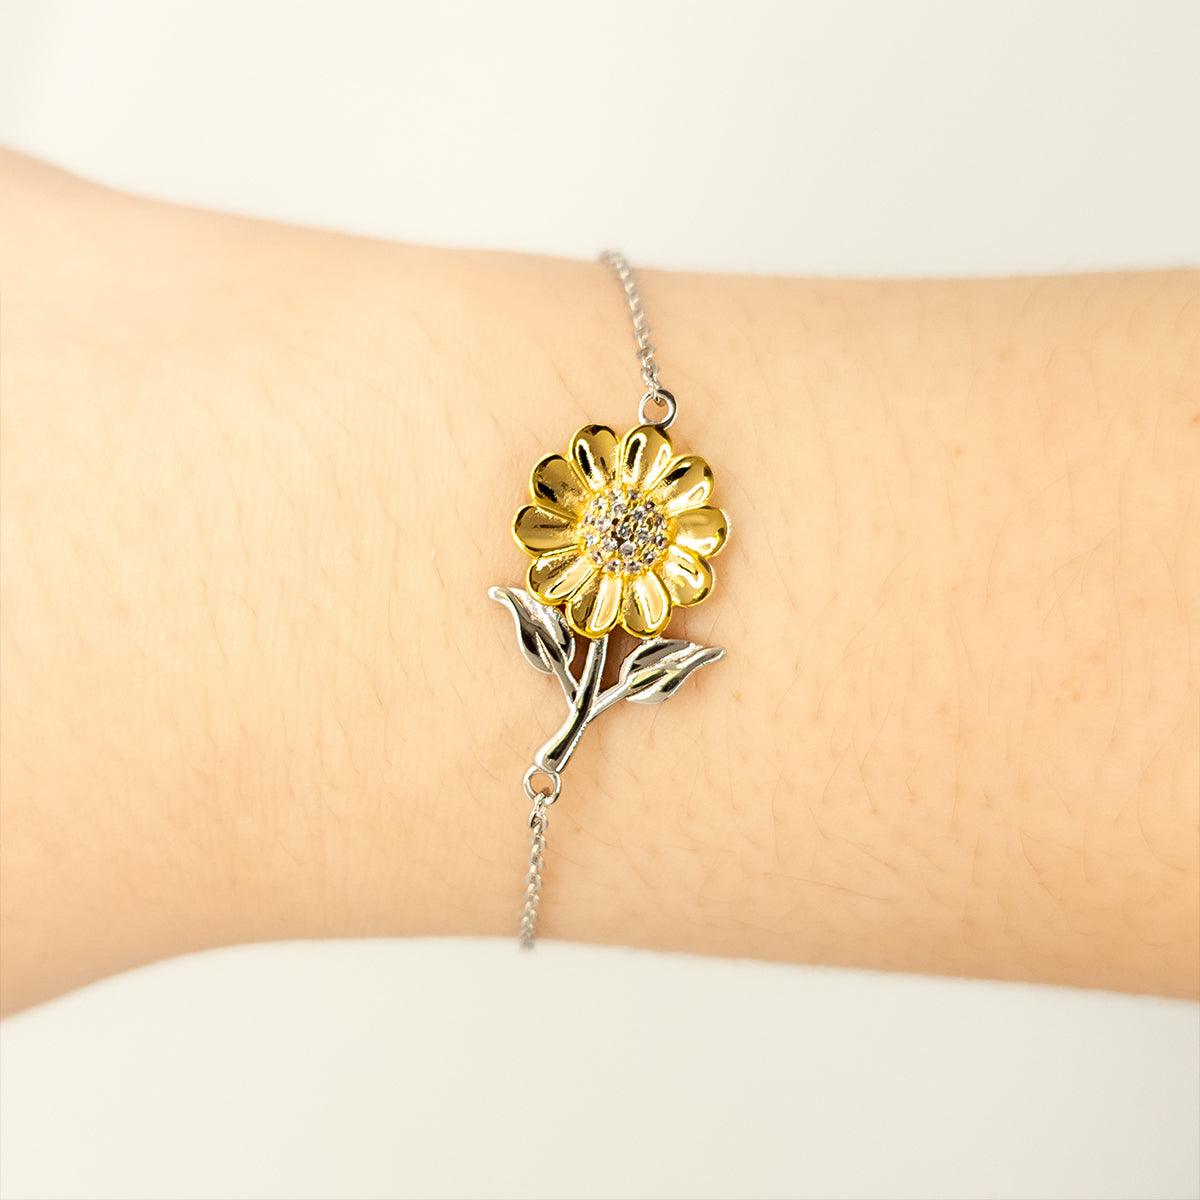 Remarkable Attendant Gifts, Your dedication and hard work, Inspirational Birthday Christmas Unique Sunflower Bracelet For Attendant, Coworkers, Men, Women, Friends - Mallard Moon Gift Shop